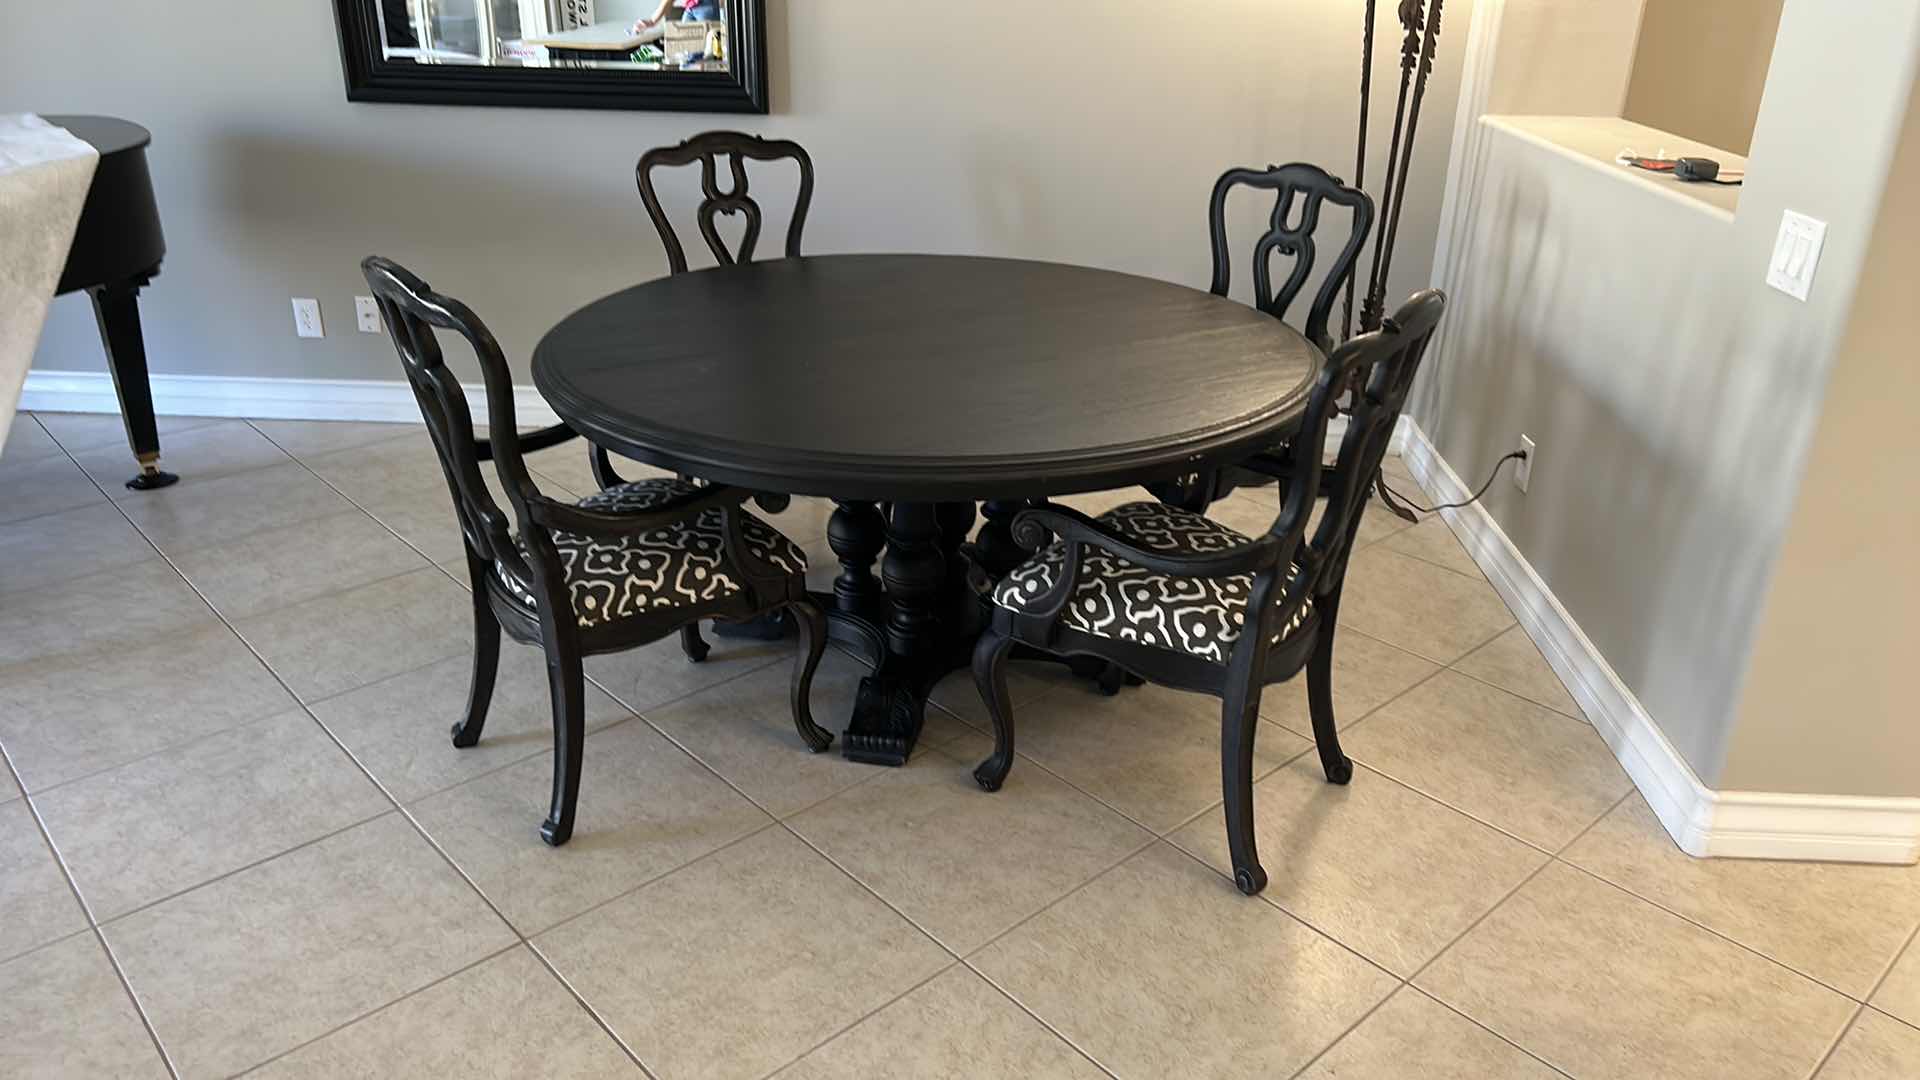 Photo 14 of STANLEY BLACK RUSTICA 64” ROUND TABLE WITH FOUR CHAIRS ESTIMATED VALUE $5245